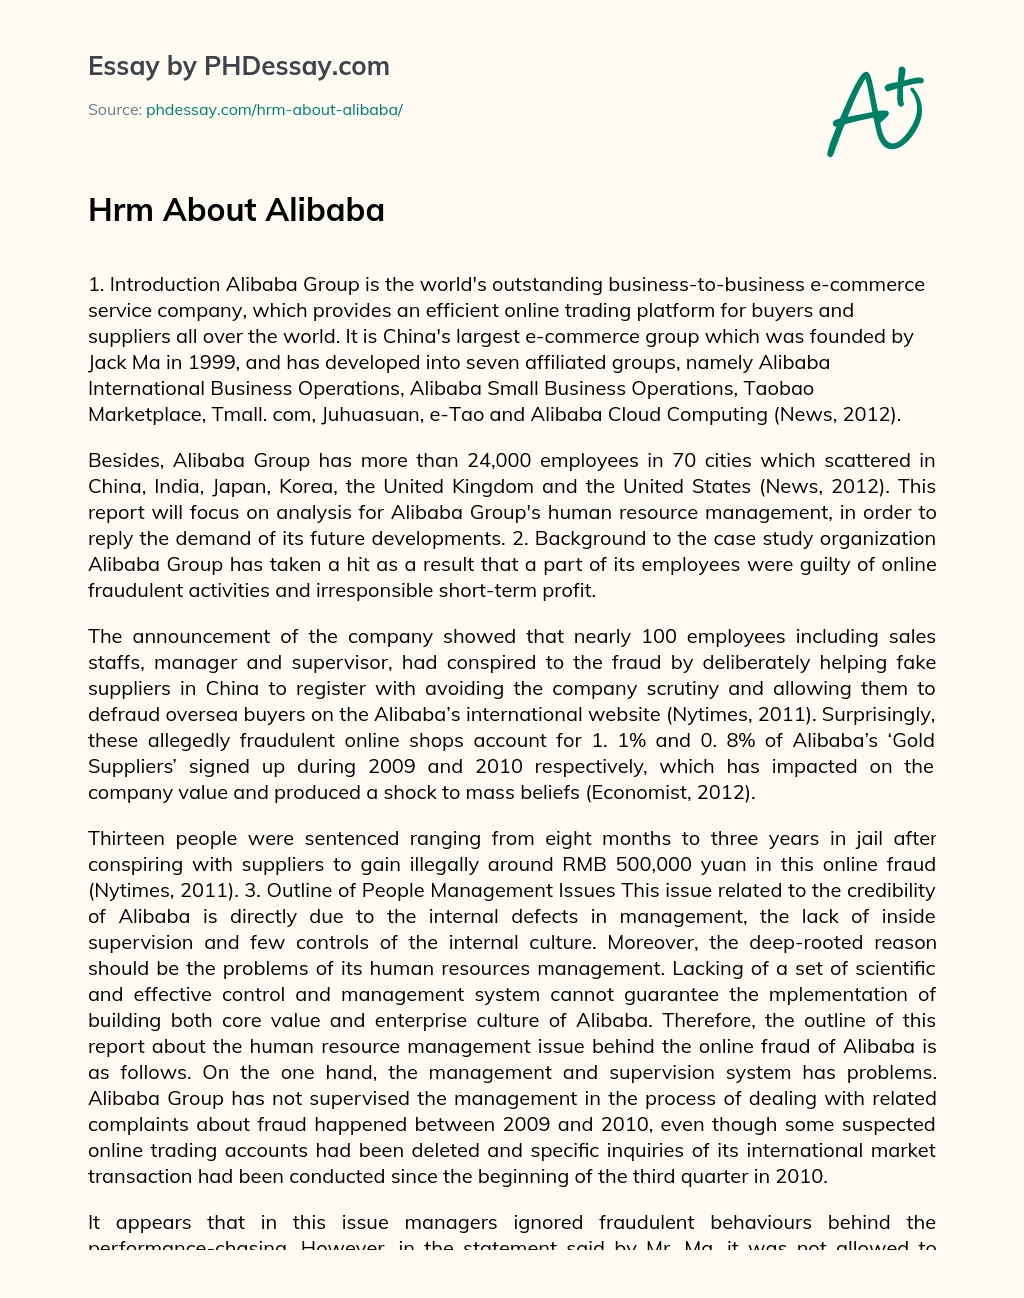 Hrm About Alibaba essay